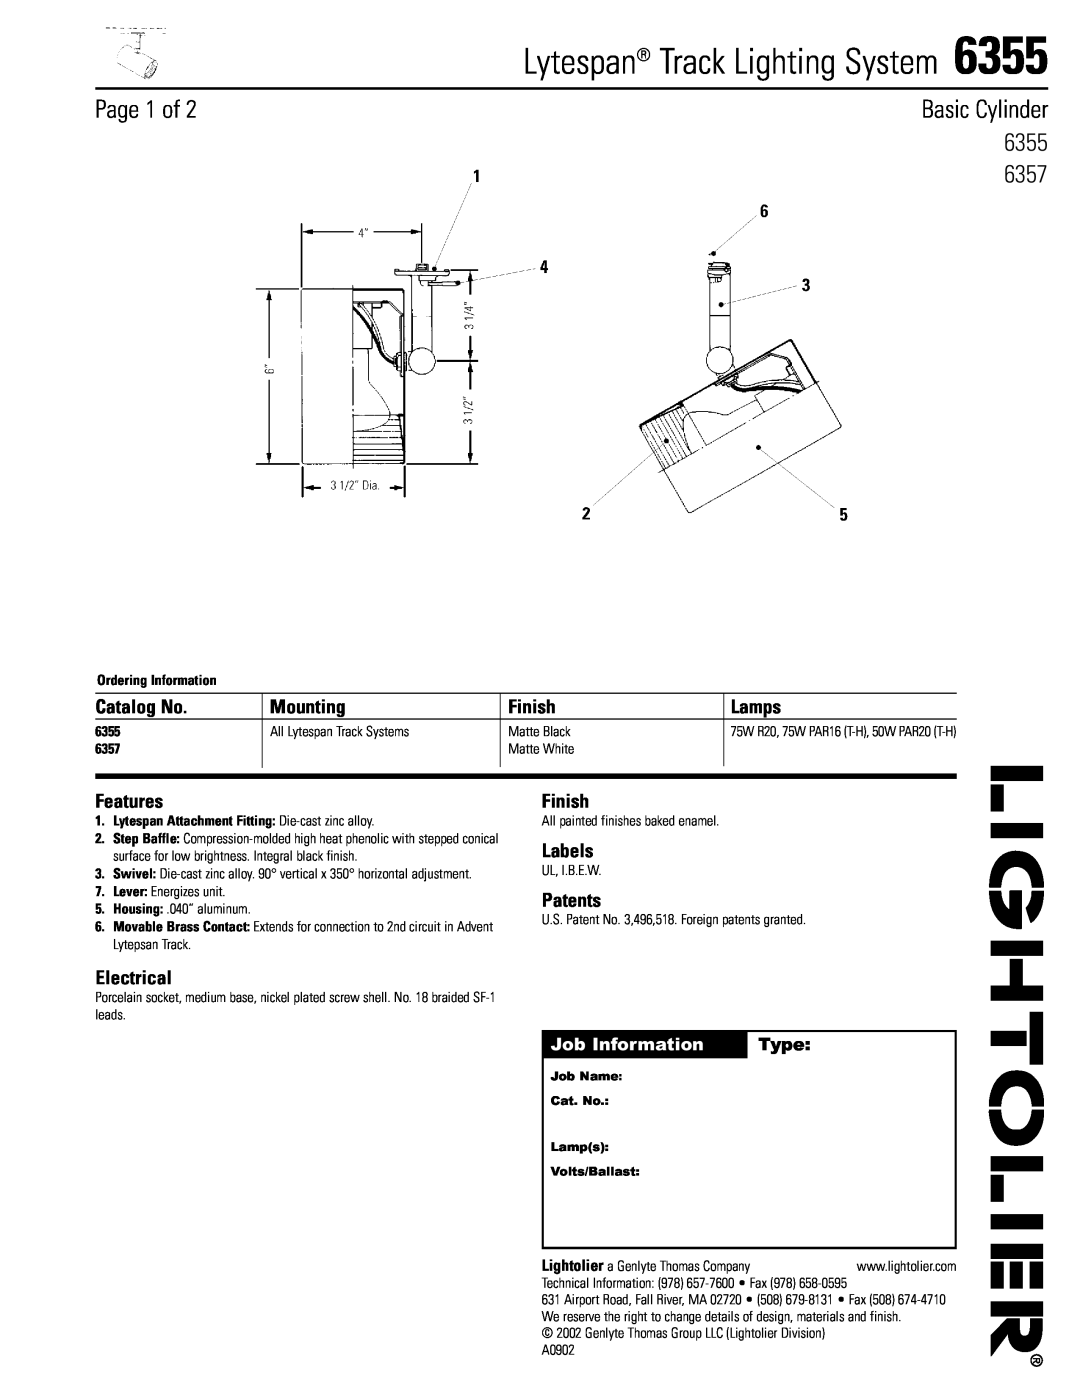 Lightolier 6355 manual Page 1 of, Basic Cylinder, Catalog No, Mounting, Finish, Lamps, Features, Labels, Patents, Type 